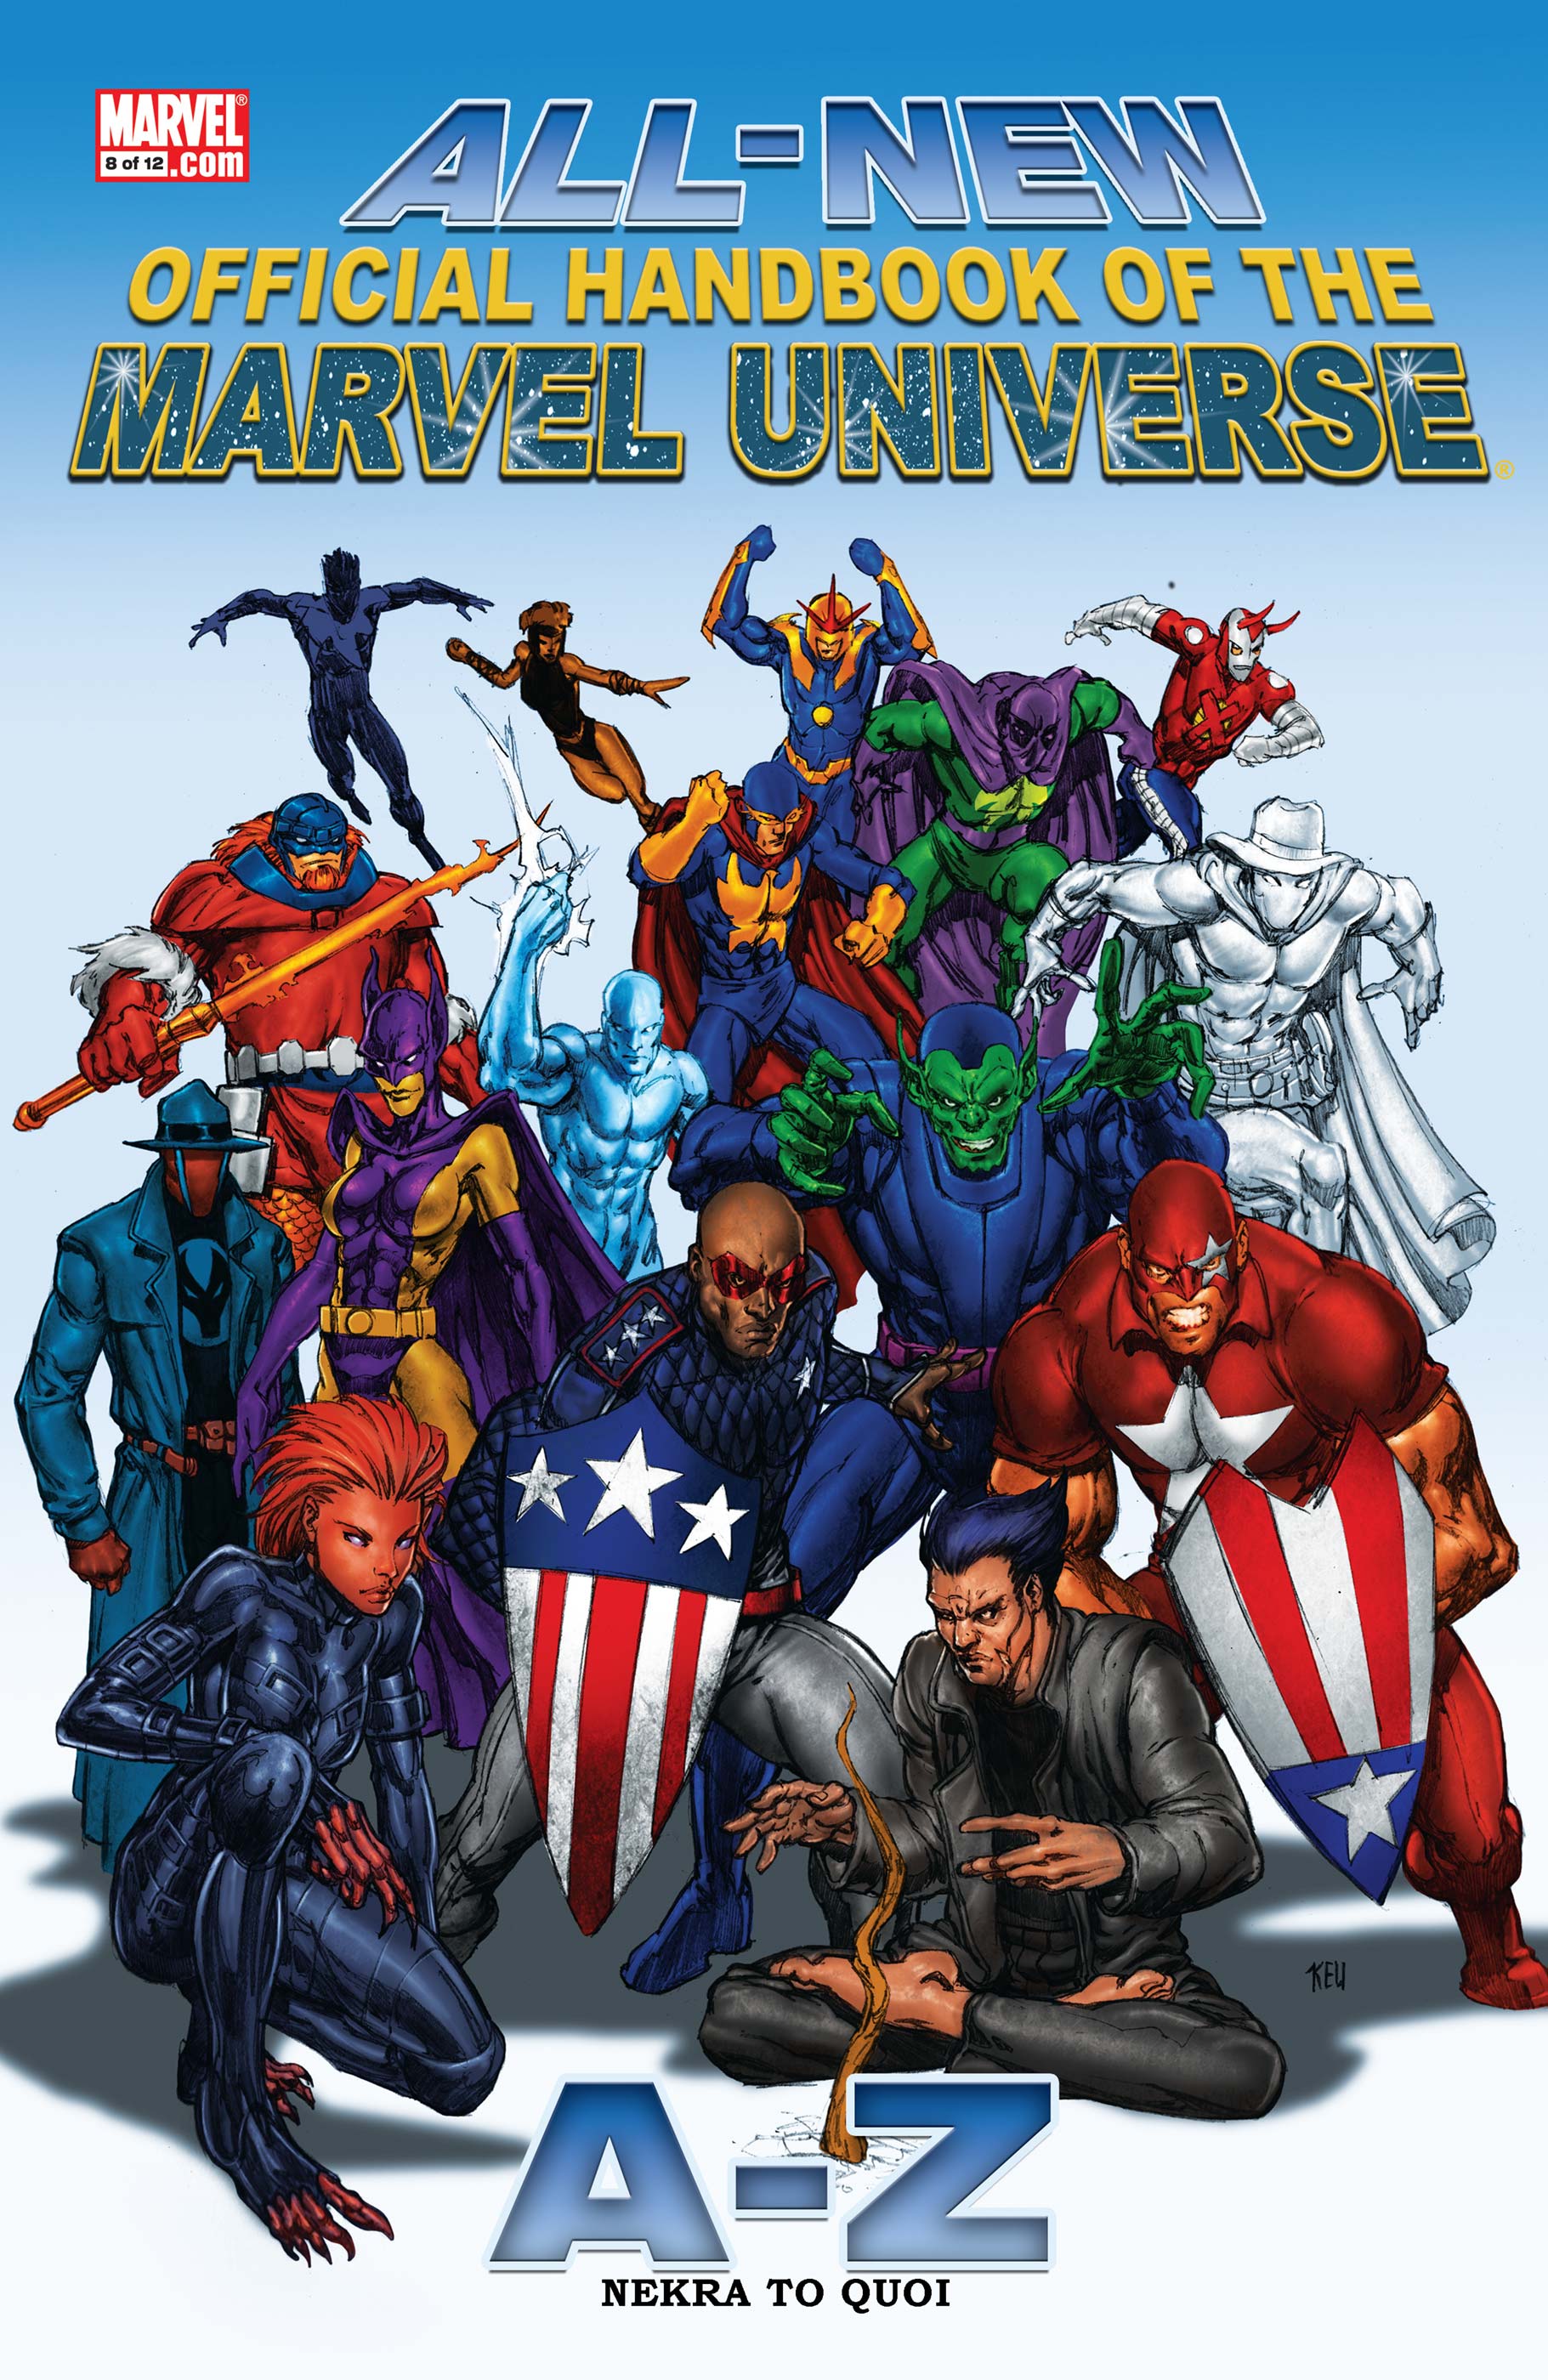 All-New Official Handbook of the Marvel Universe A to Z (2006) #8